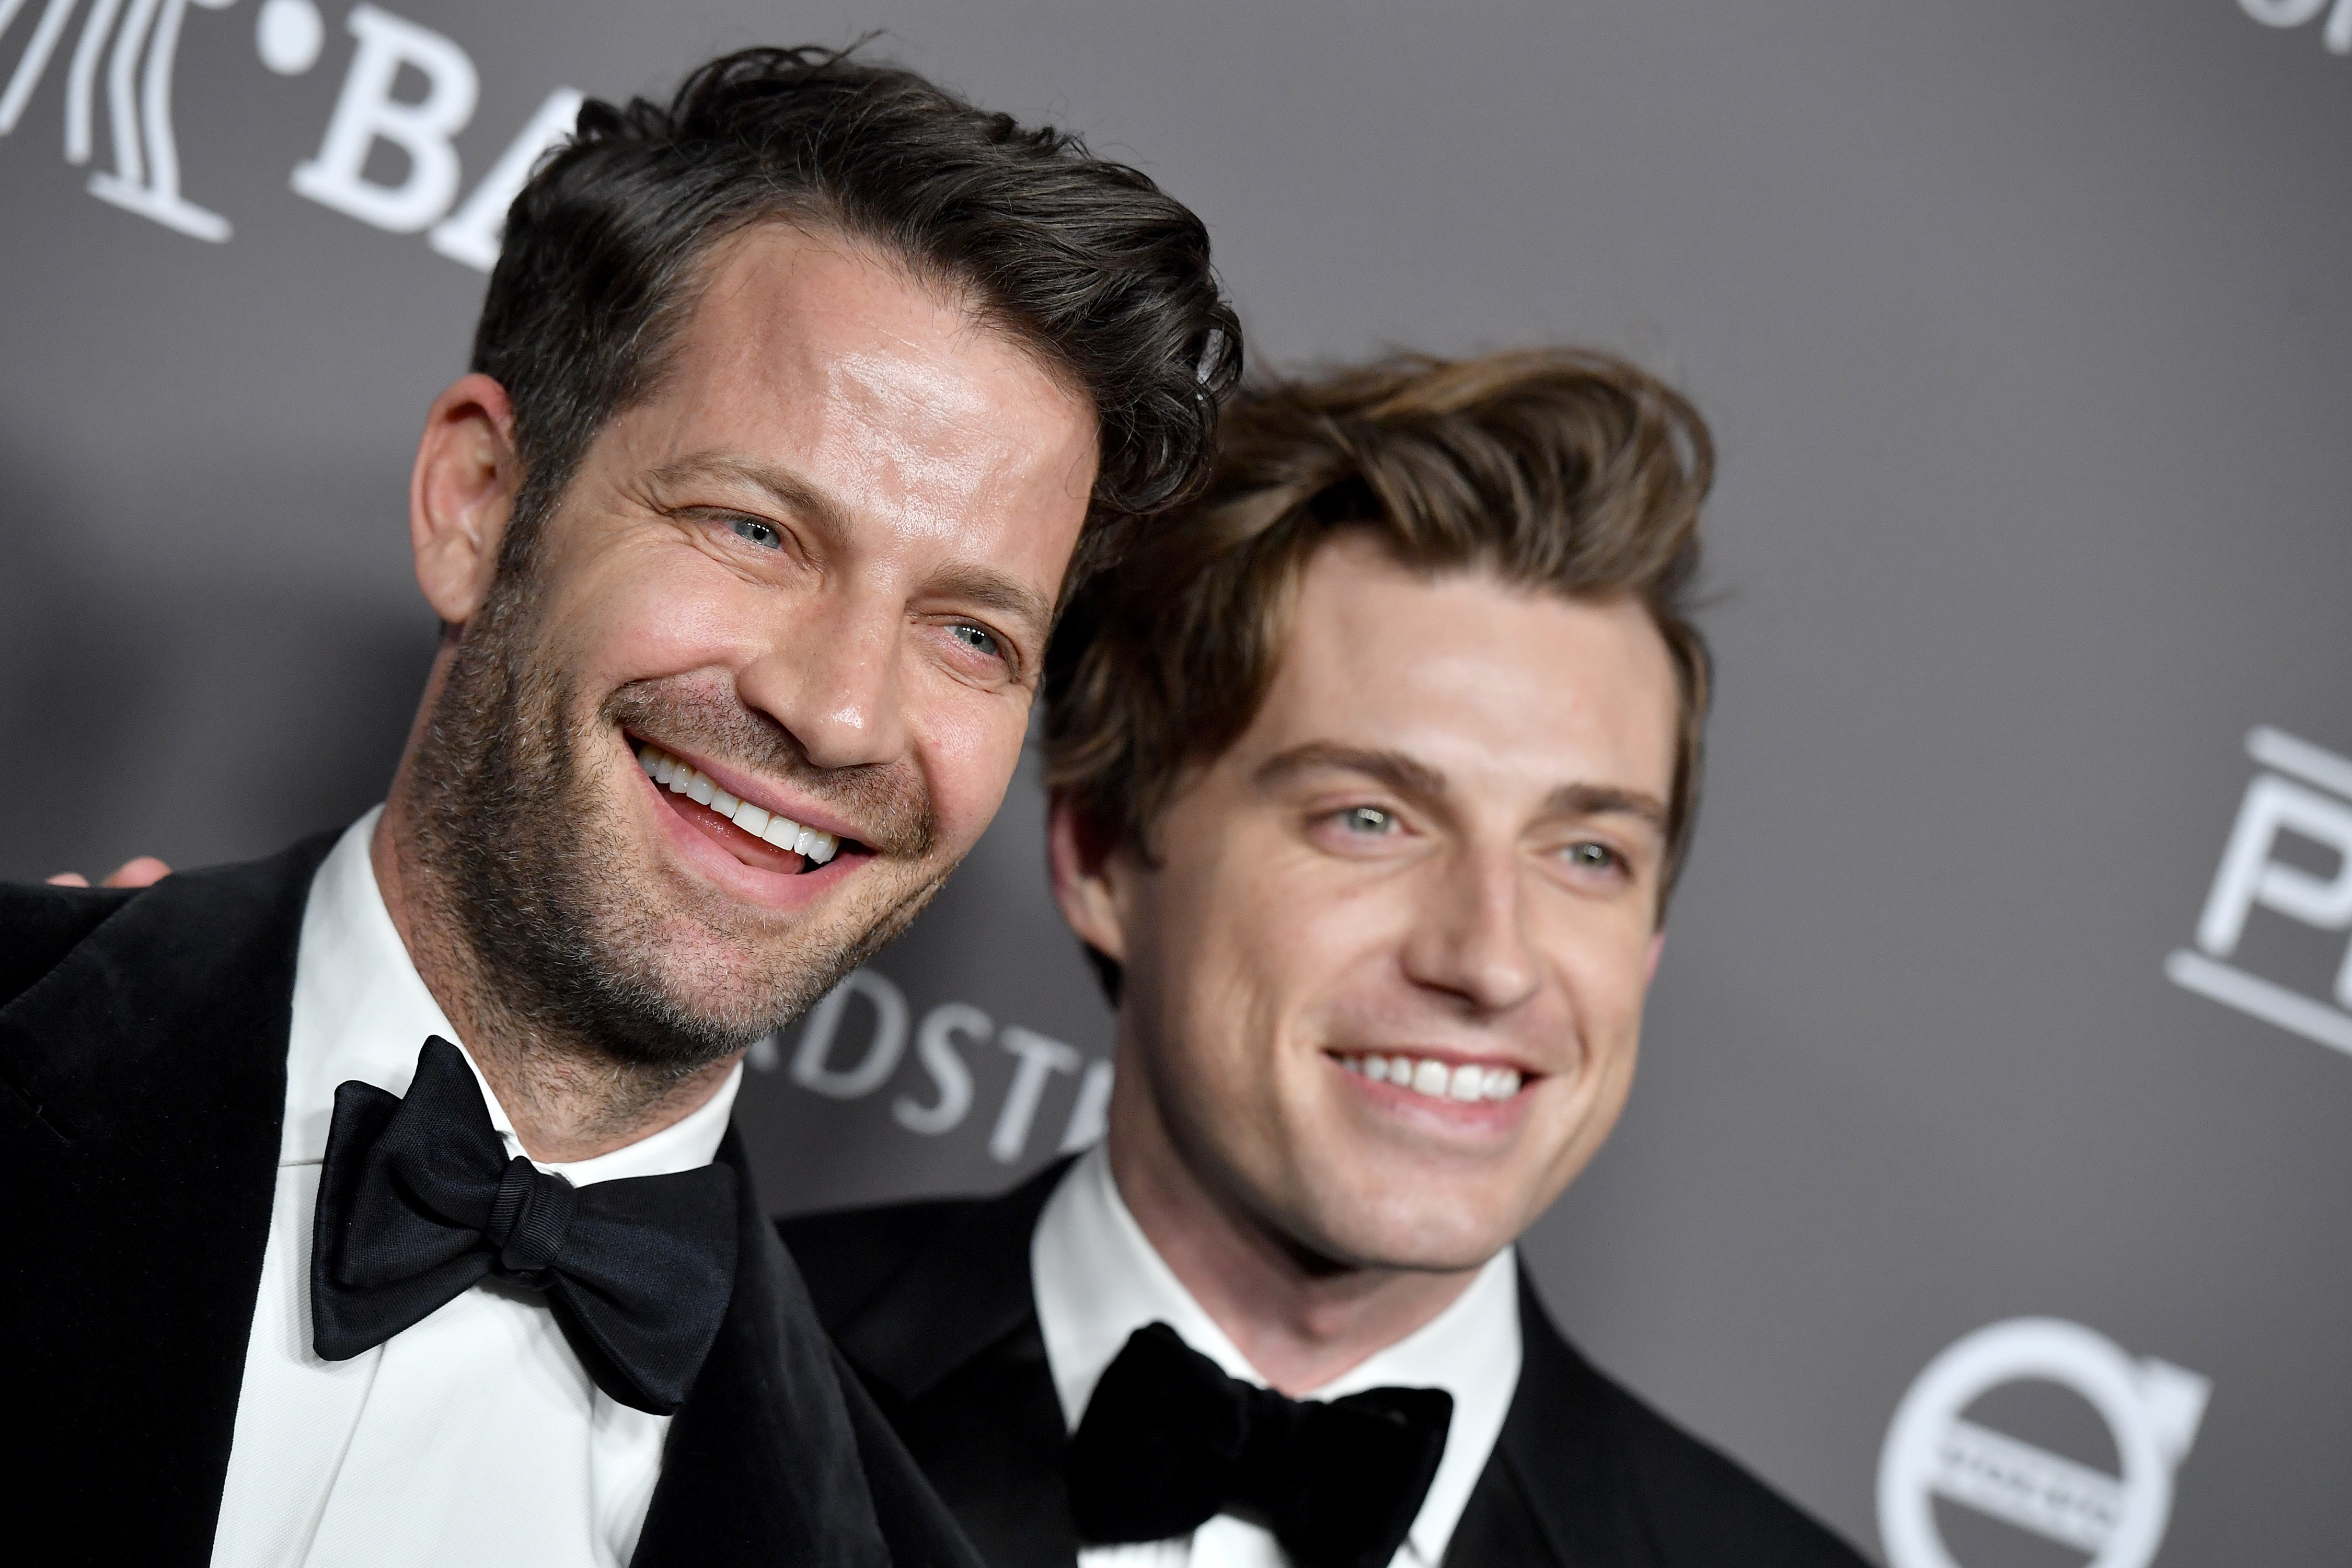 Nate Berkus and Jeremiah Brent, dressed in tuxedos, at an event in 2018